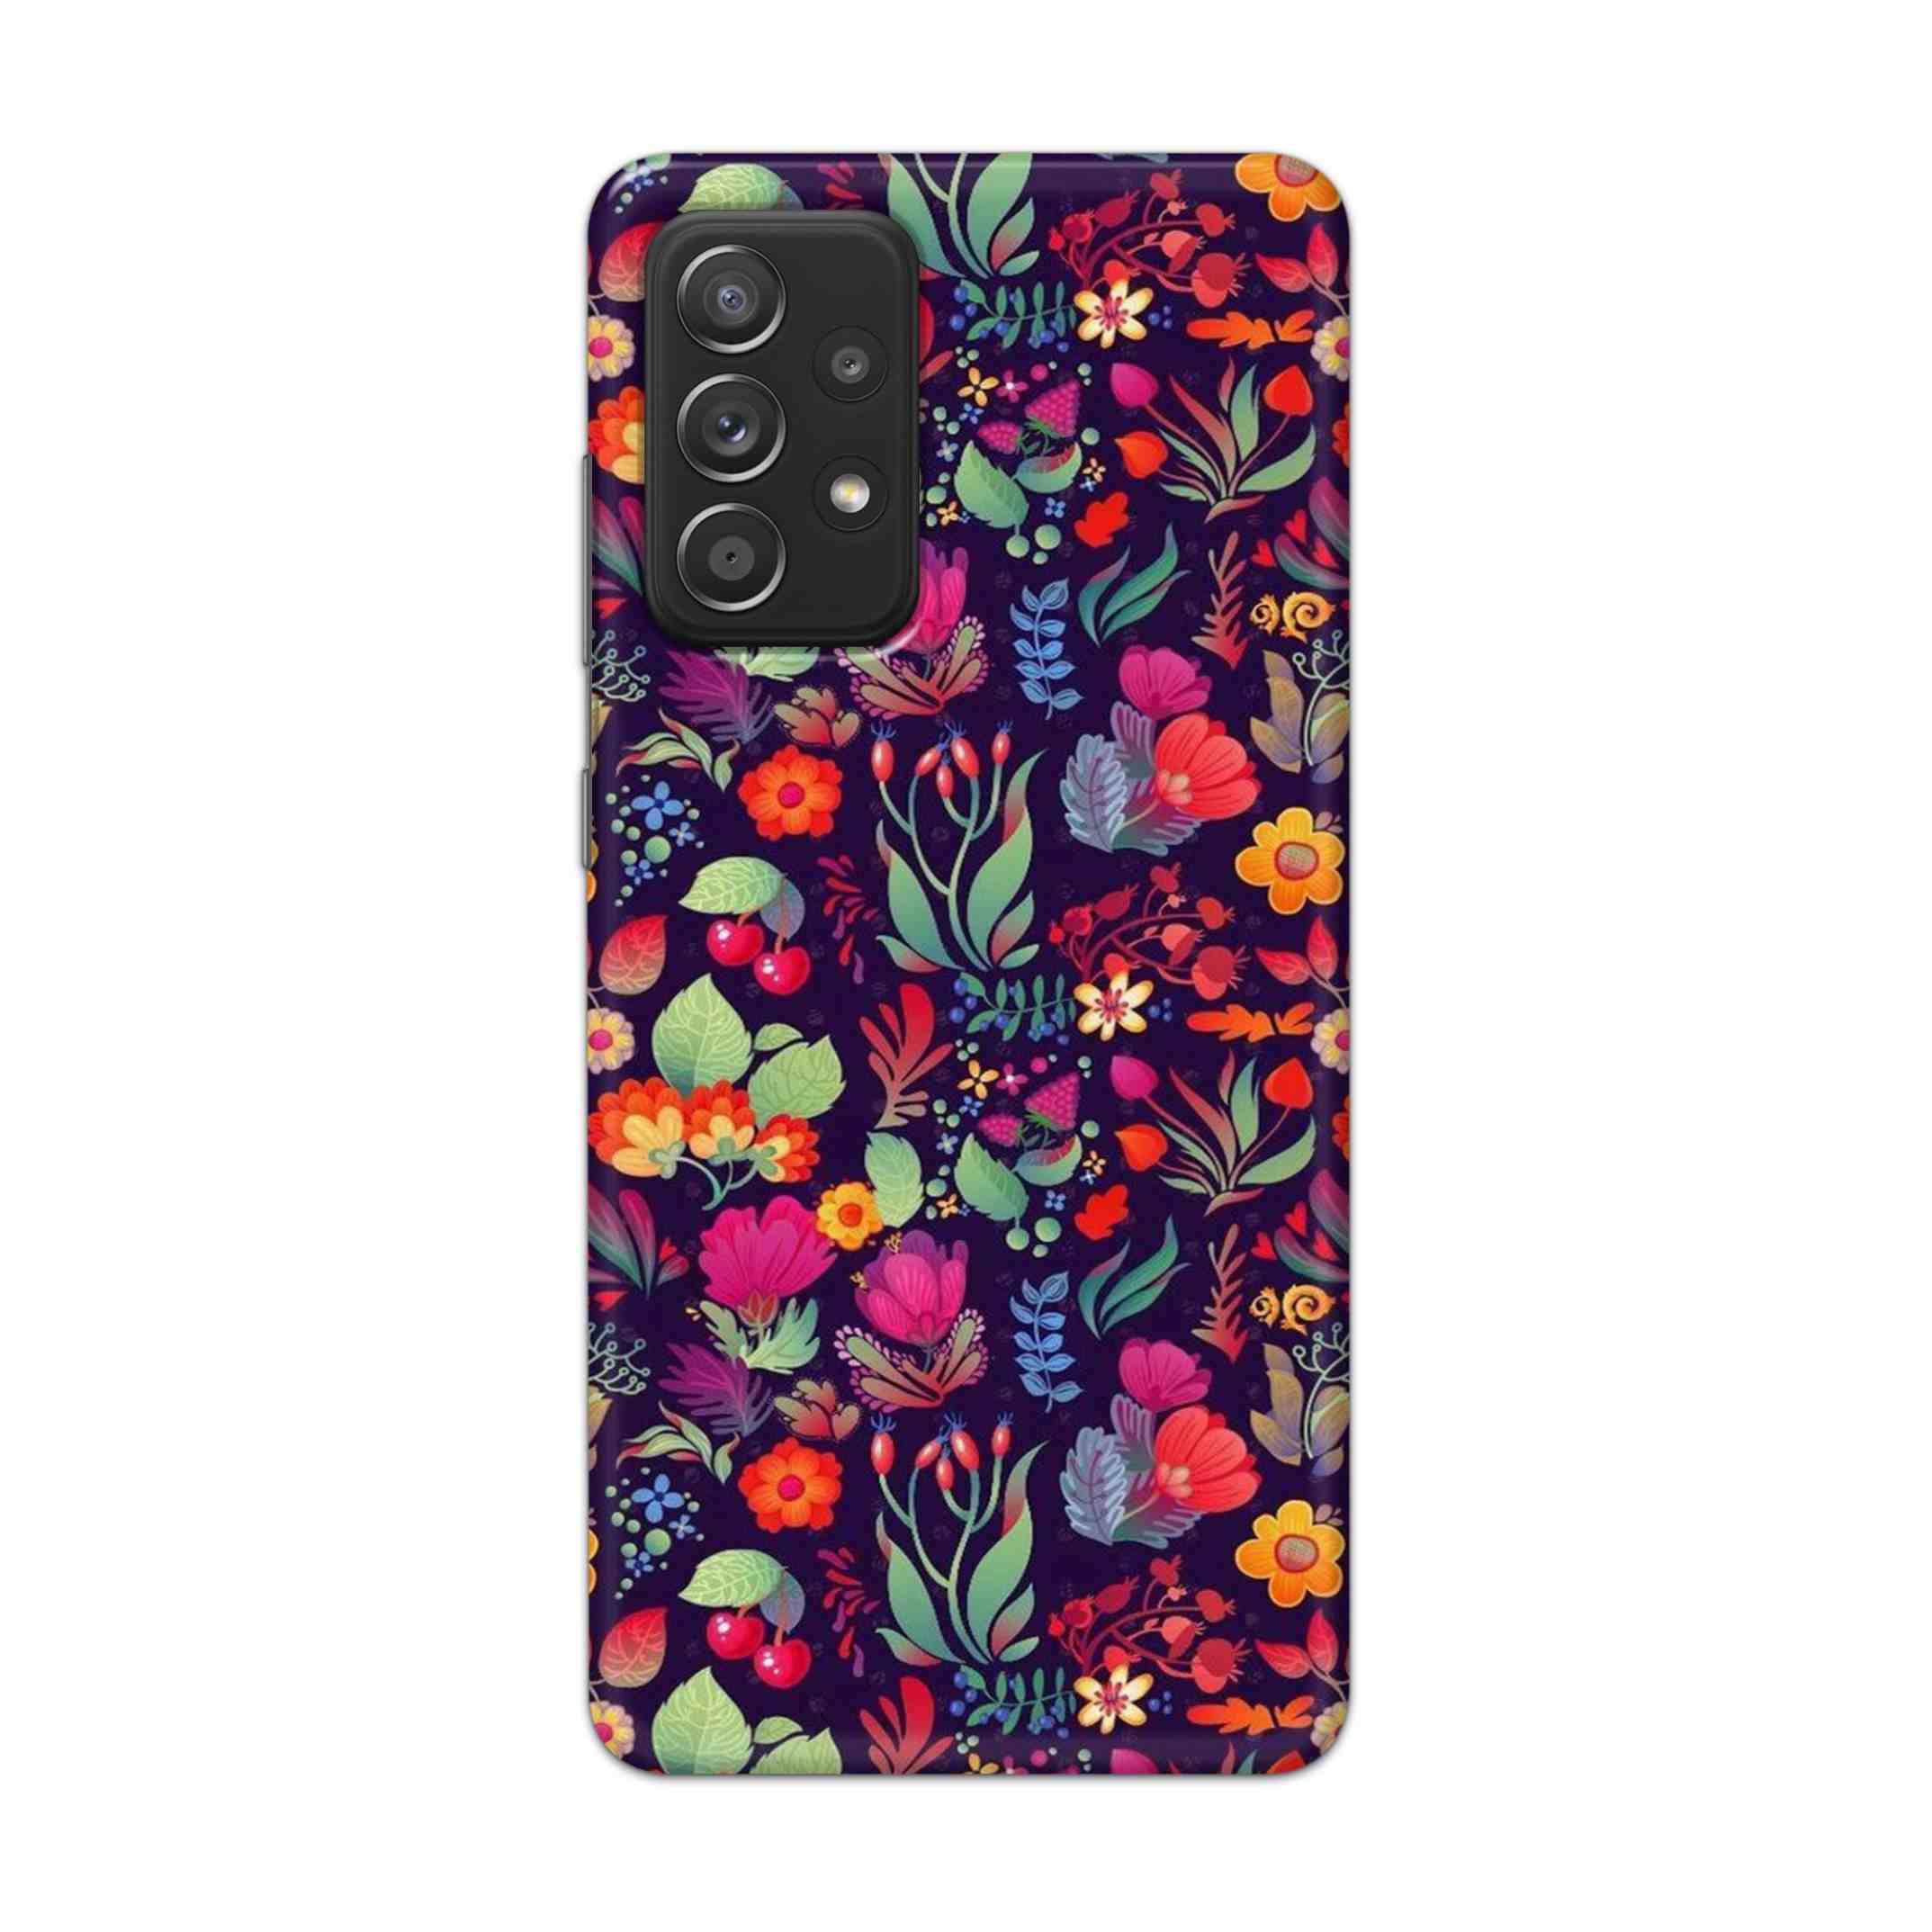 Buy Fruits Flower Hard Back Mobile Phone Case Cover For Samsung Galaxy A52 Online